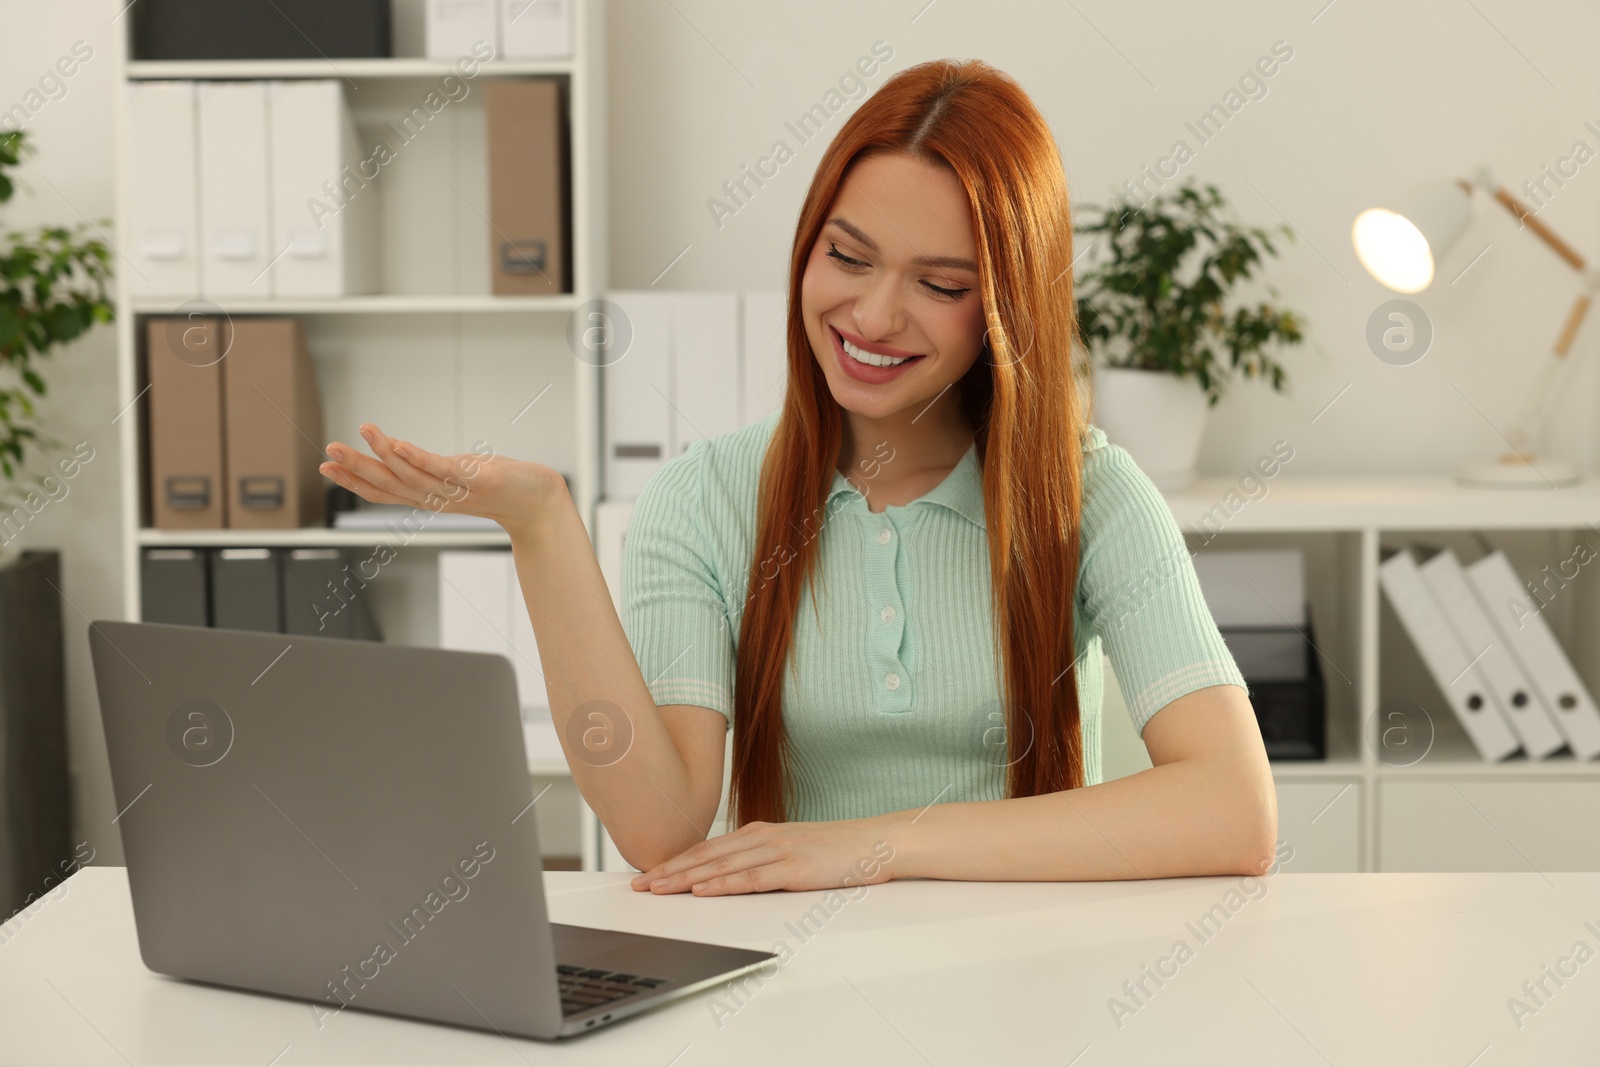 Photo of Young woman having video chat via laptop at table in office